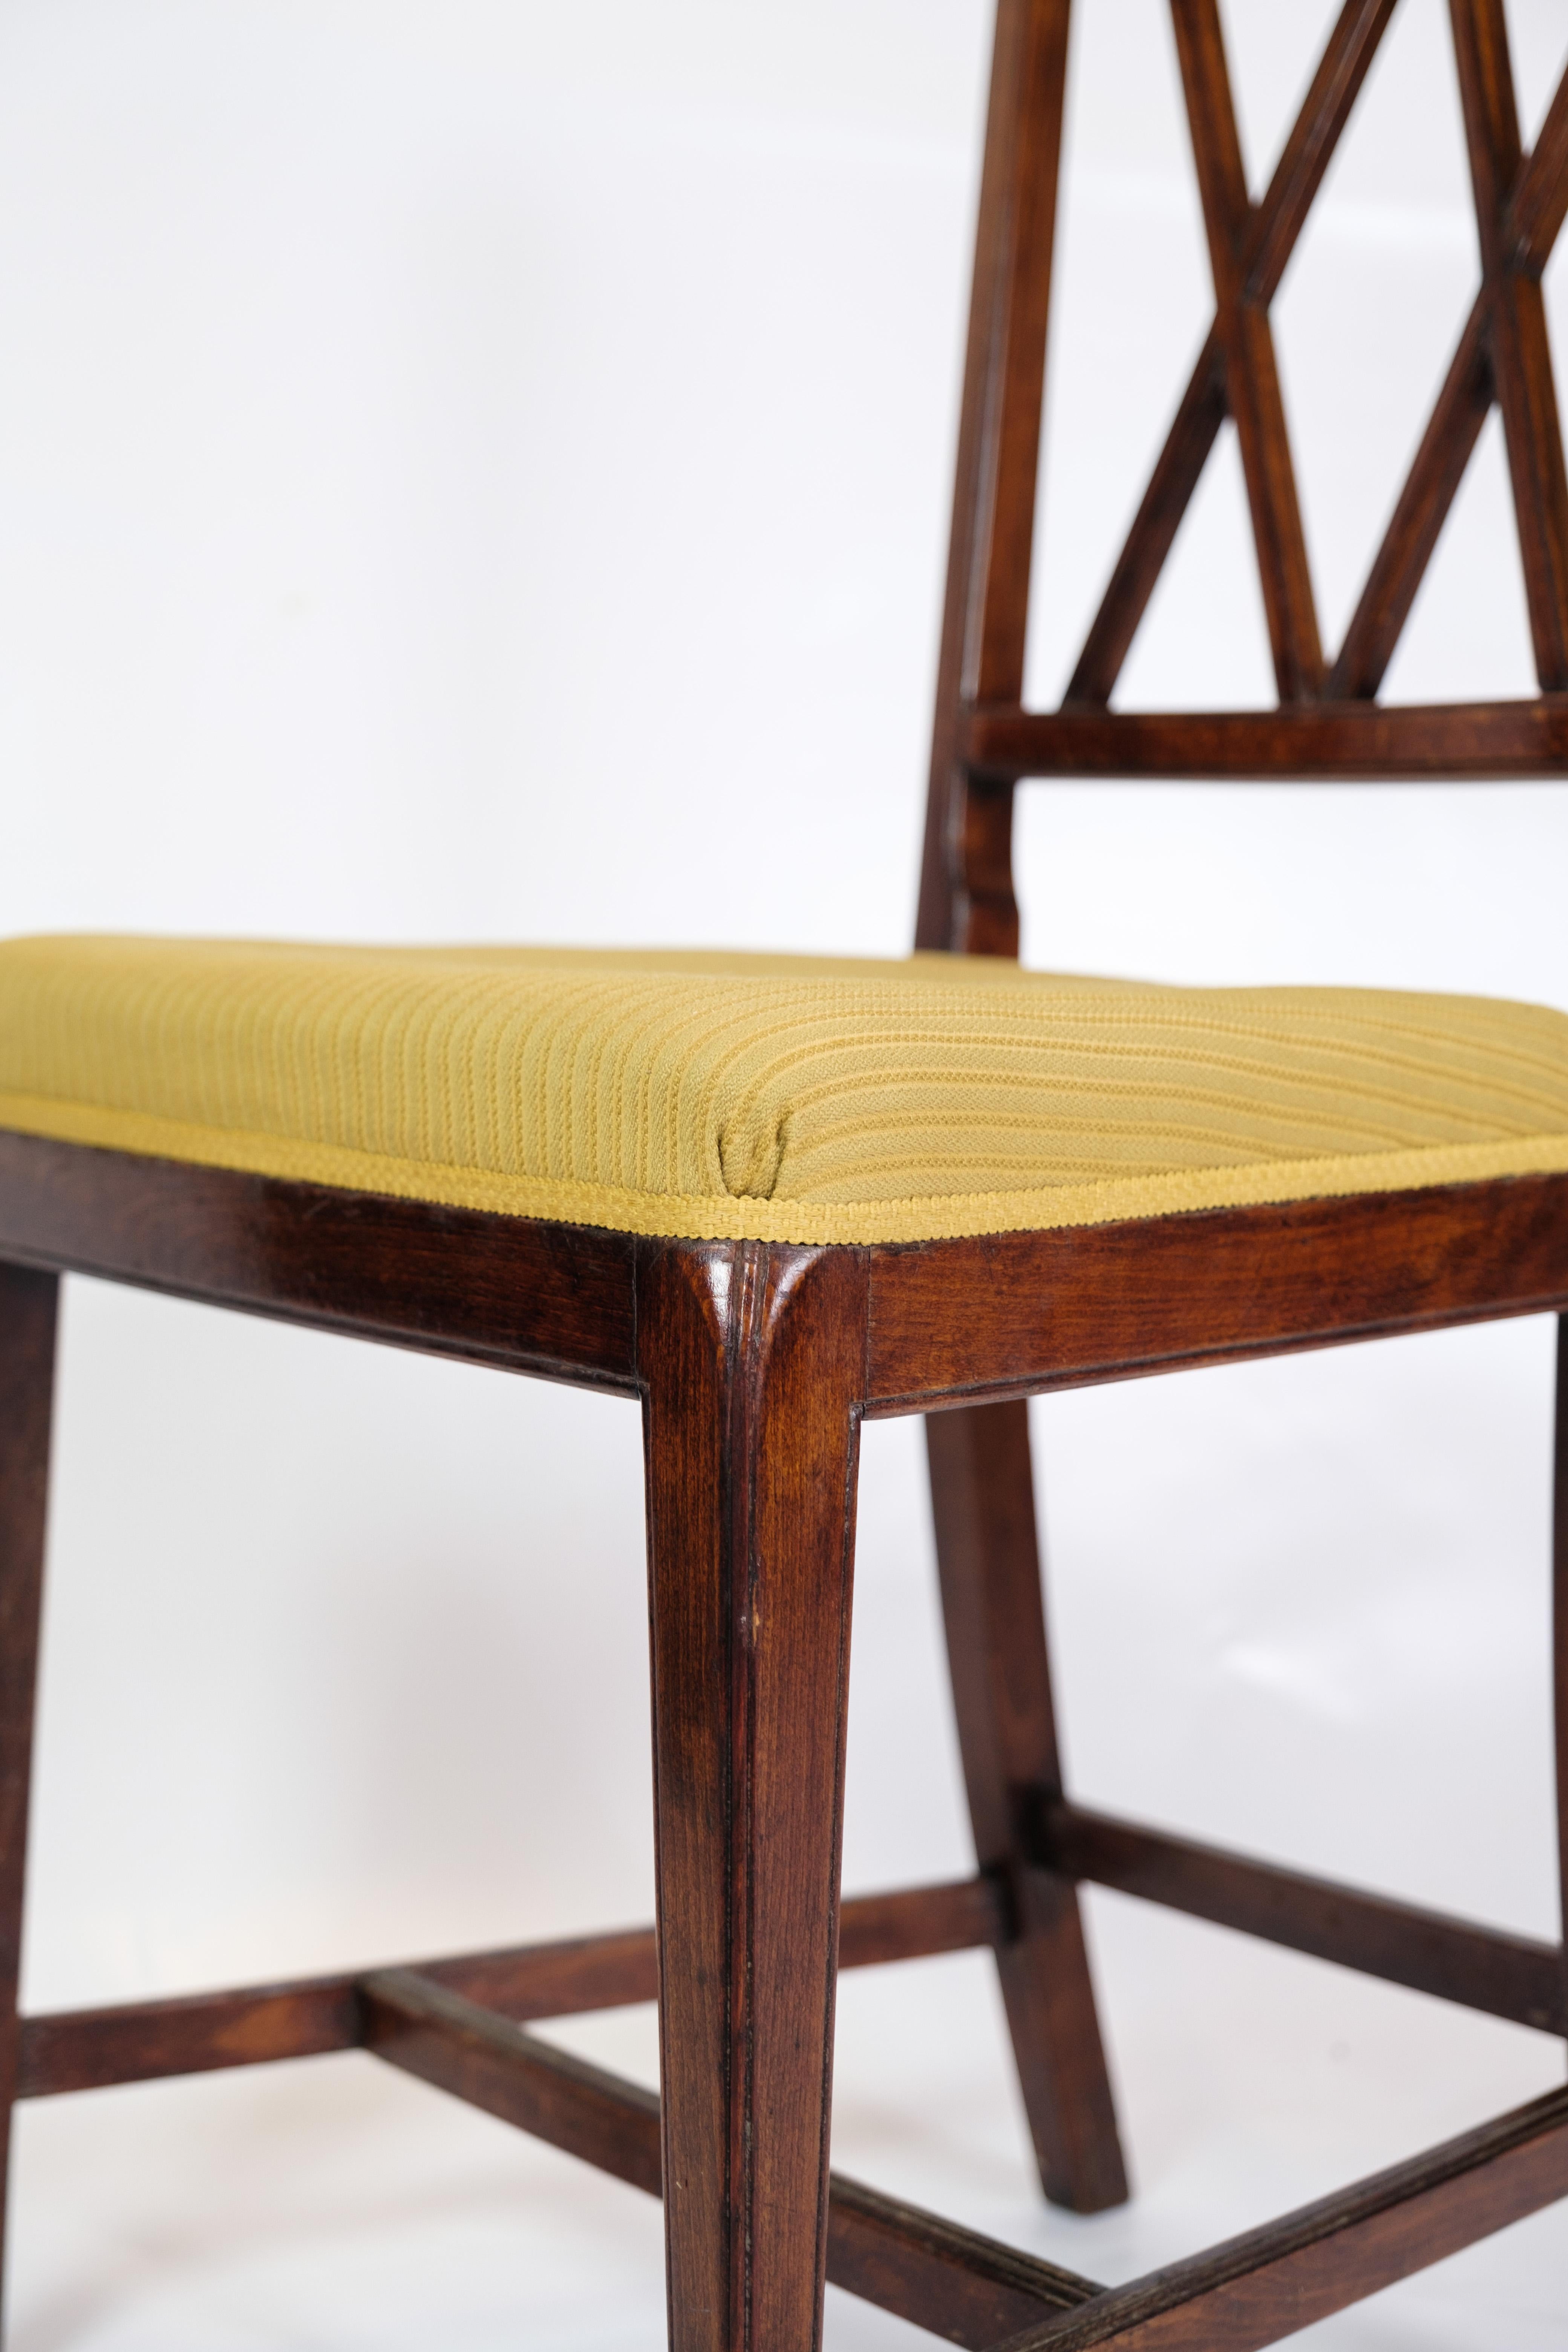 Danish Set of six Dining Chairs by Ole Wanscher for A.J. Iversen from 1950s.